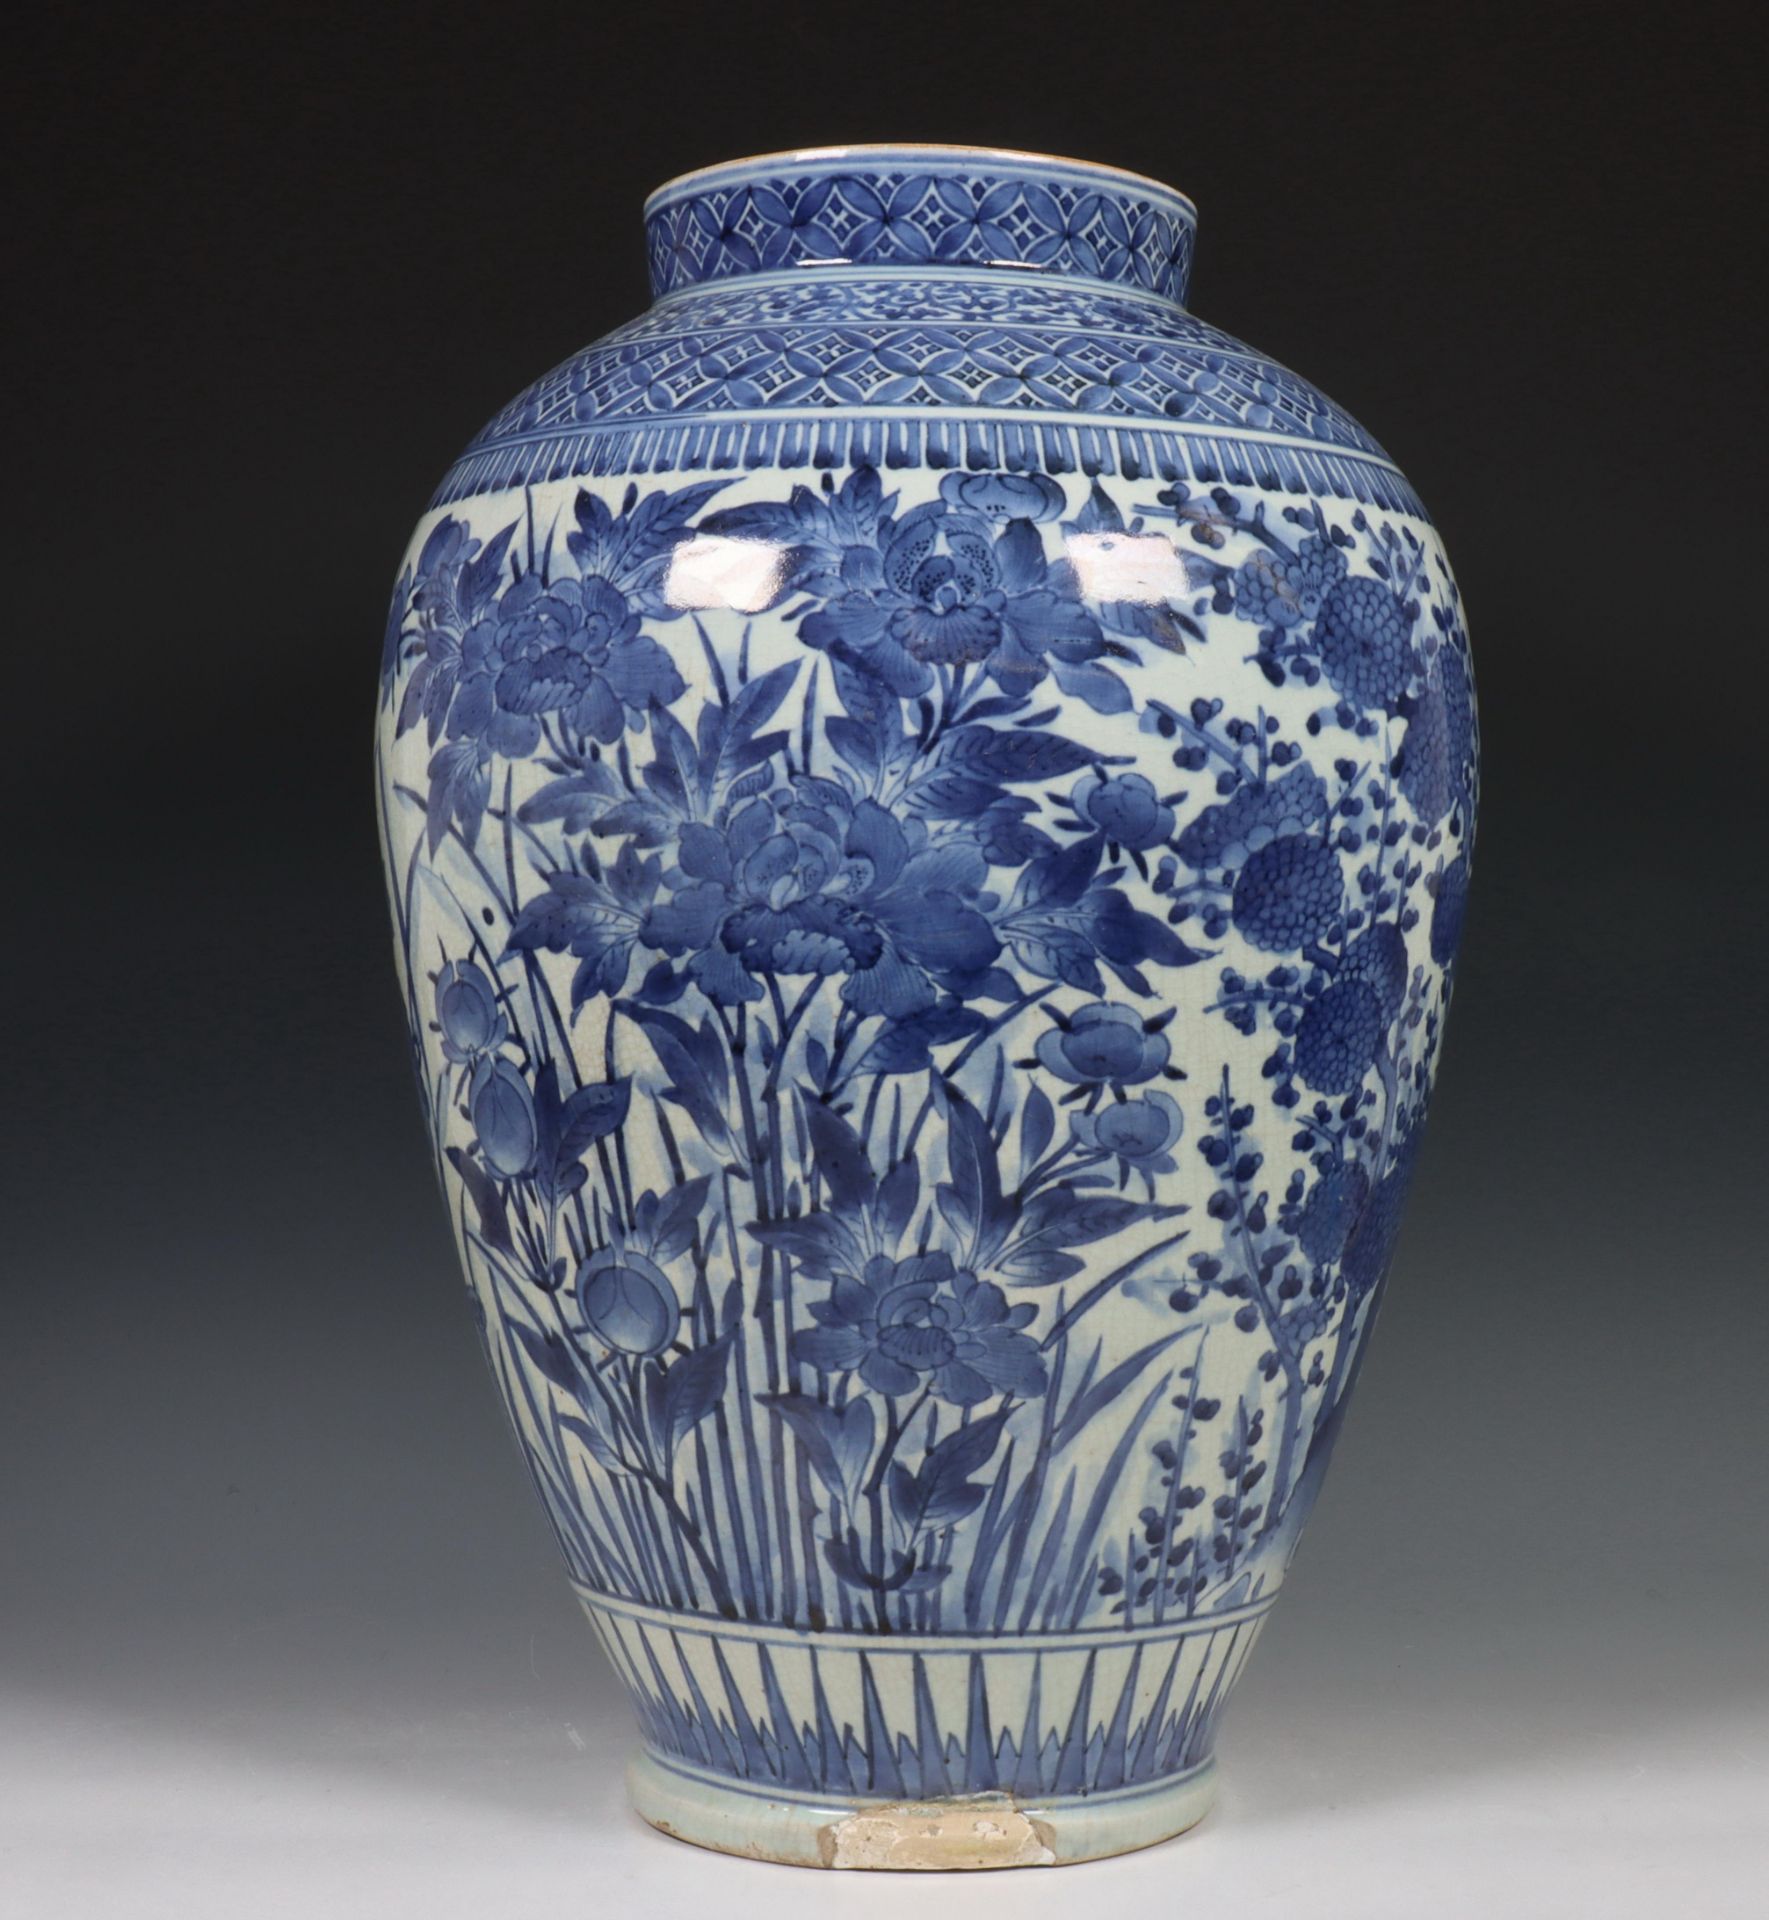 Japan, blue and white porcelain baluster vase, Meiji period, 19th century, decorated with prunus,